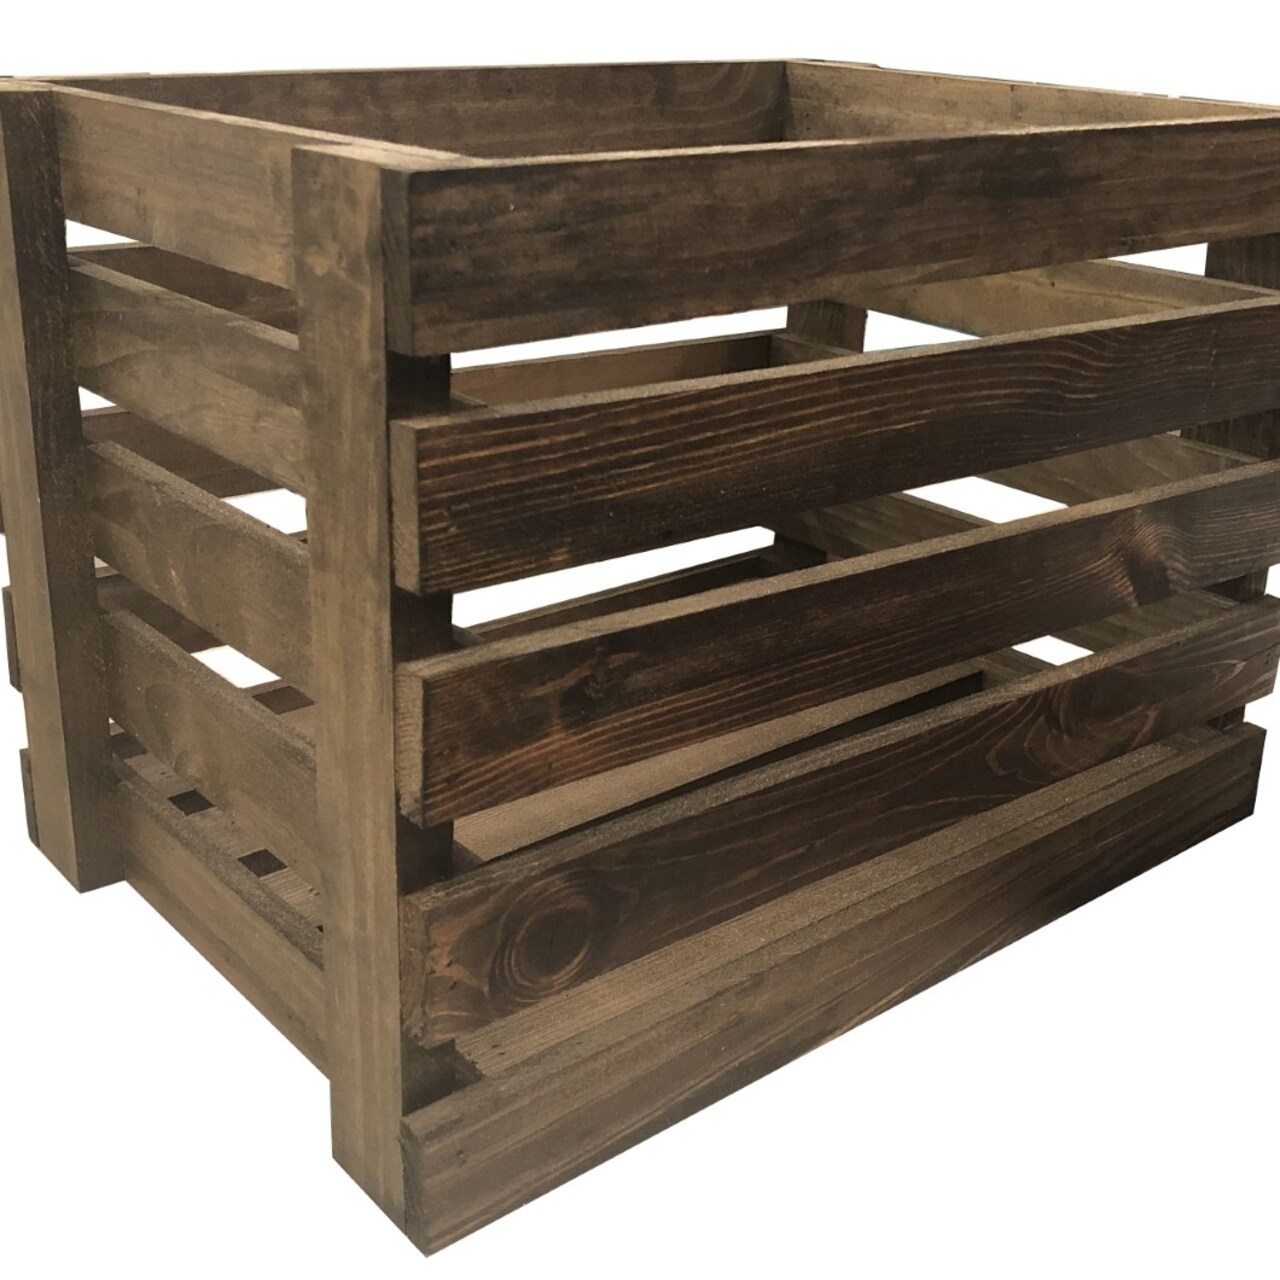 Mowoodwork   Large wood crate stained dark walnut